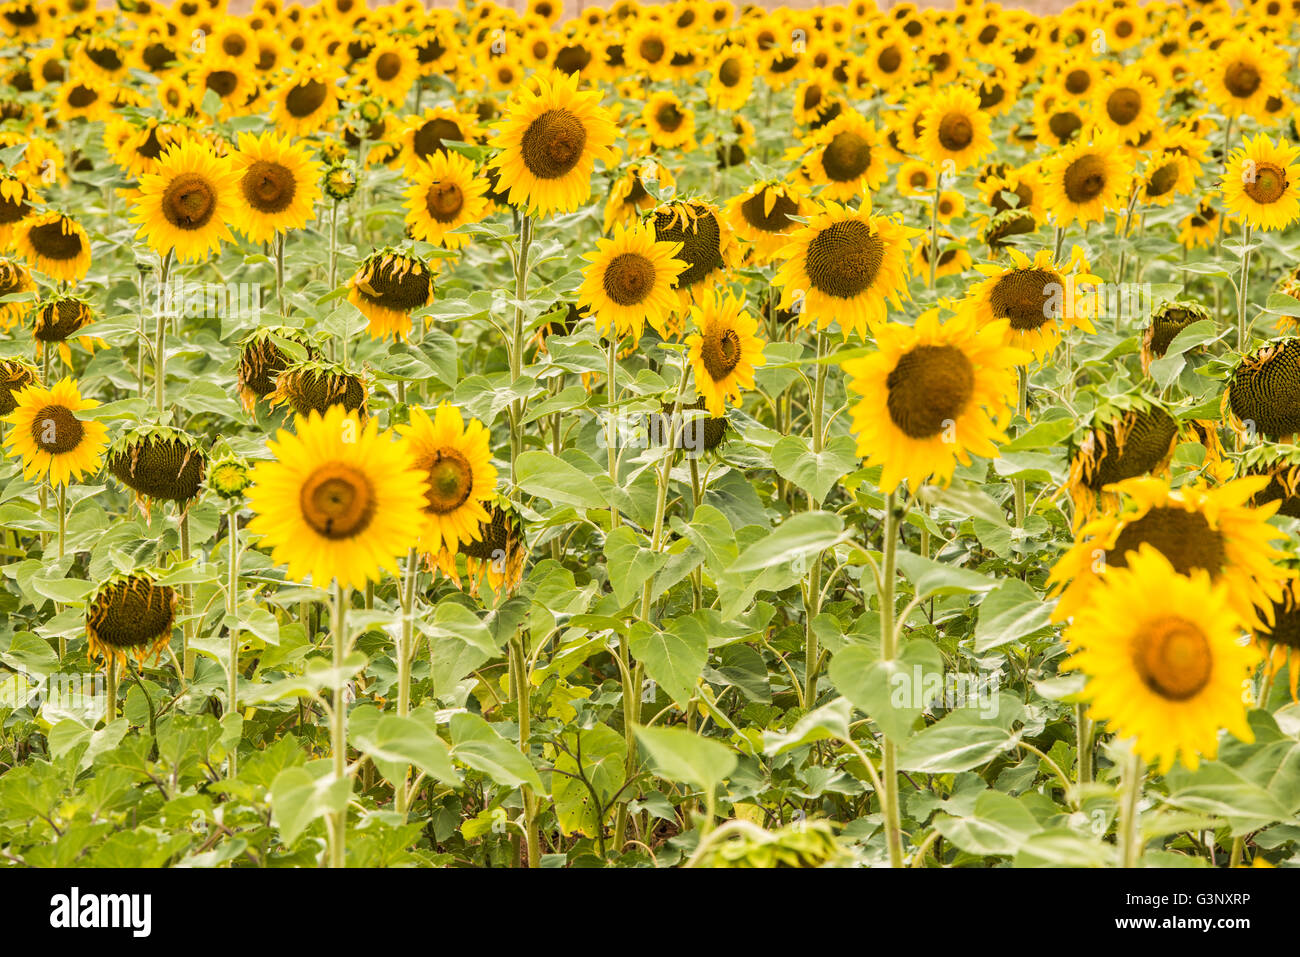 Close up view of a bright yellow sunflower field with opened flowers Stock Photo